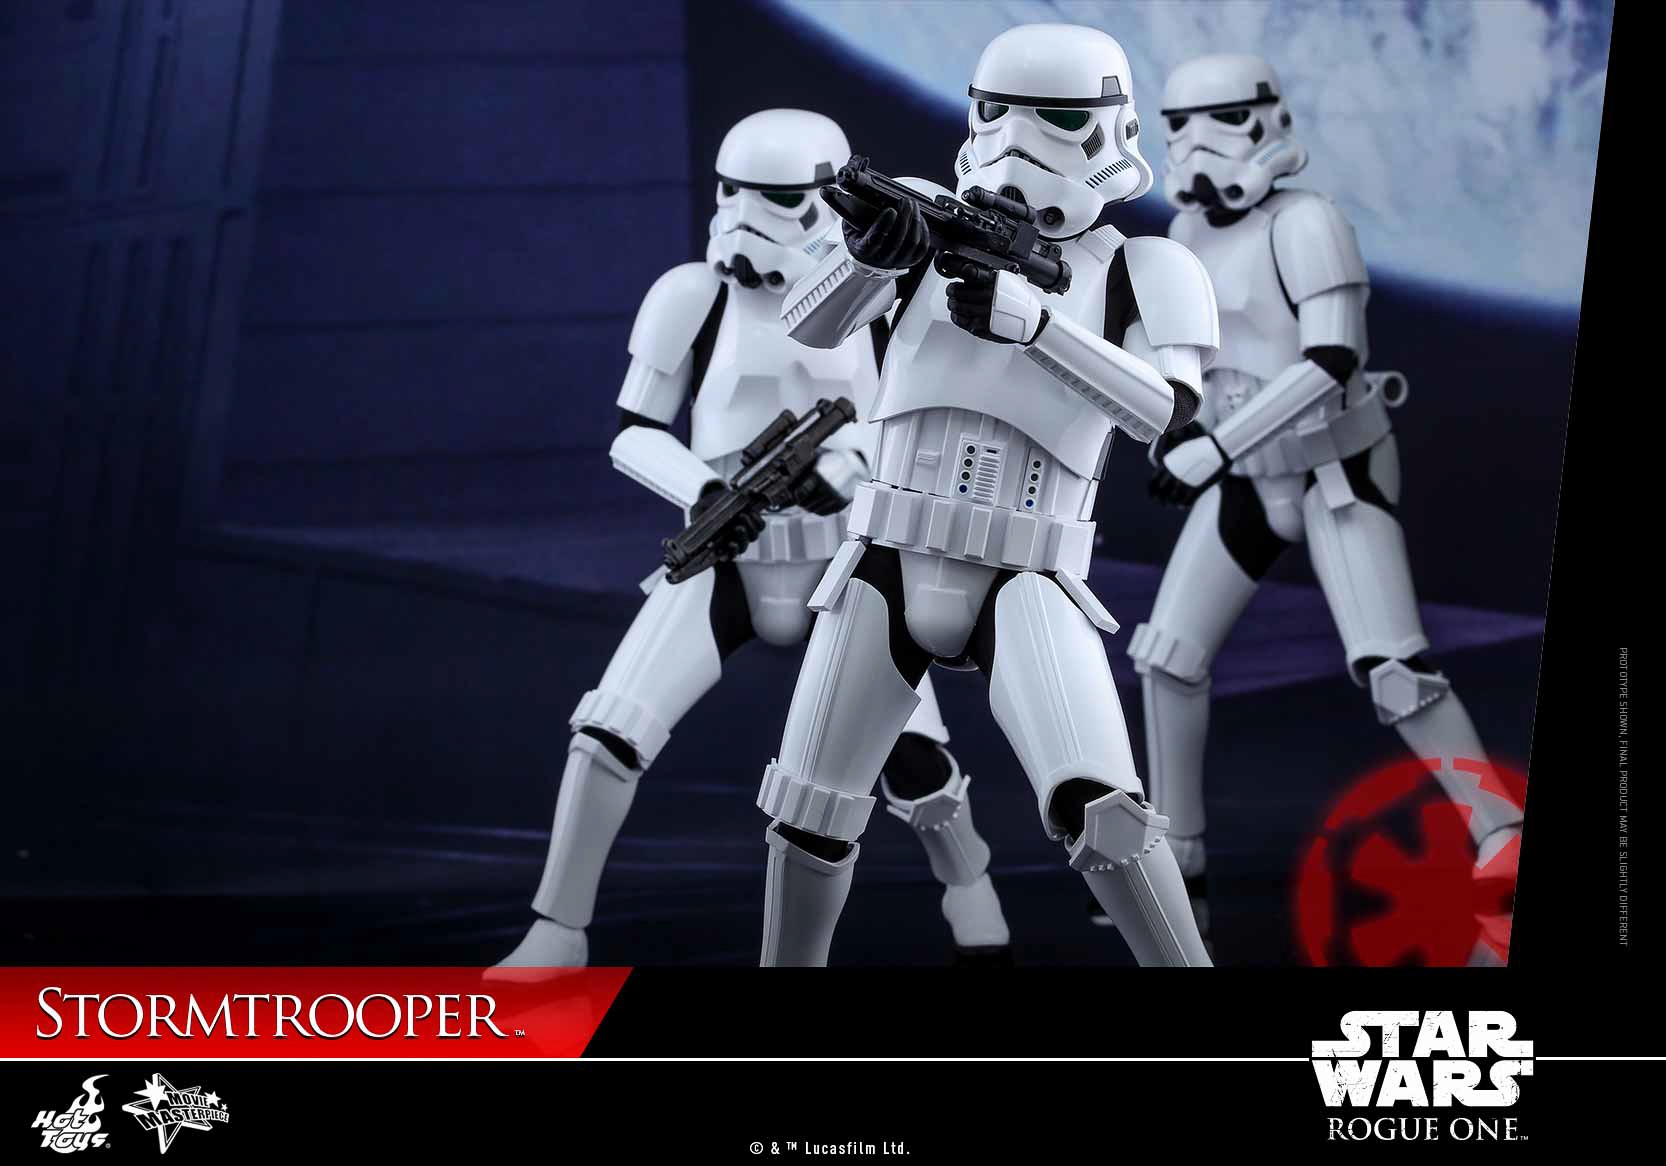 New Rogue One 1/6th scale Imperial Stormtrooper figure revealed by Hot